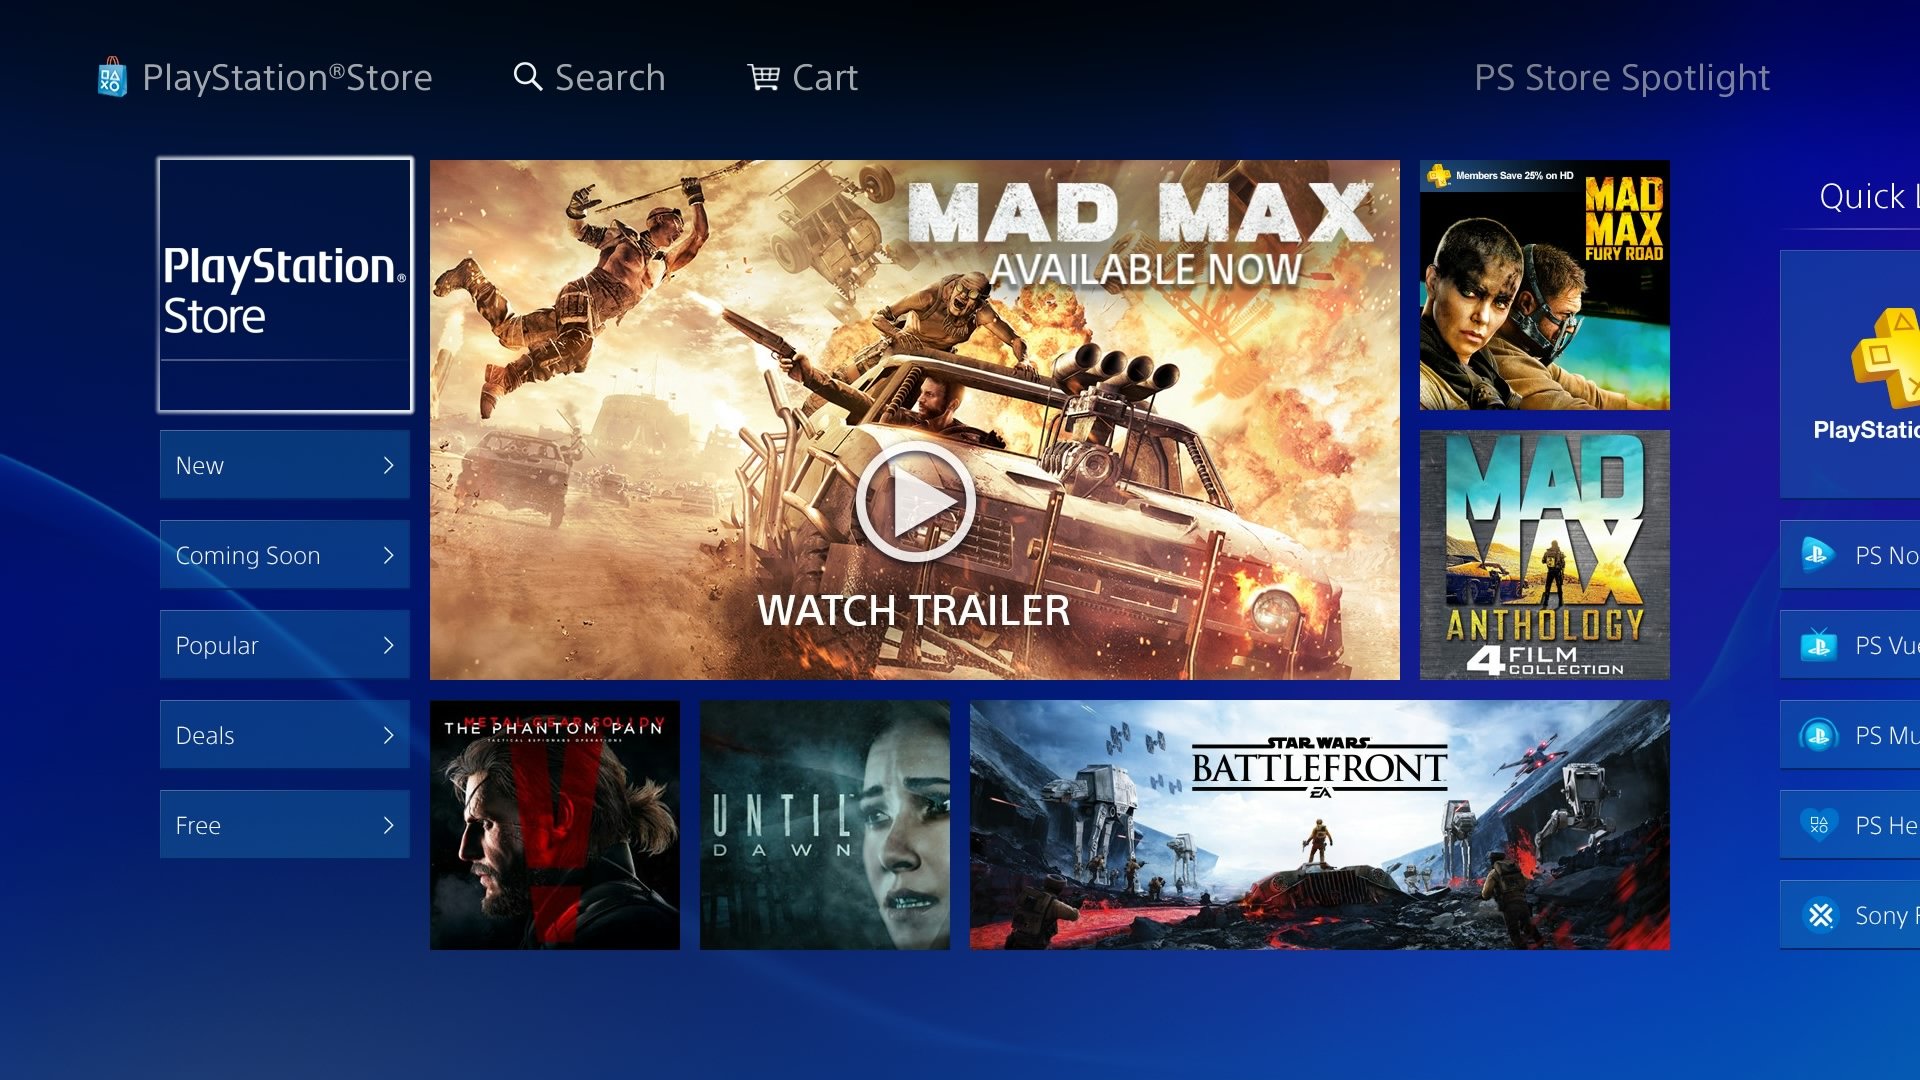 ps3 store